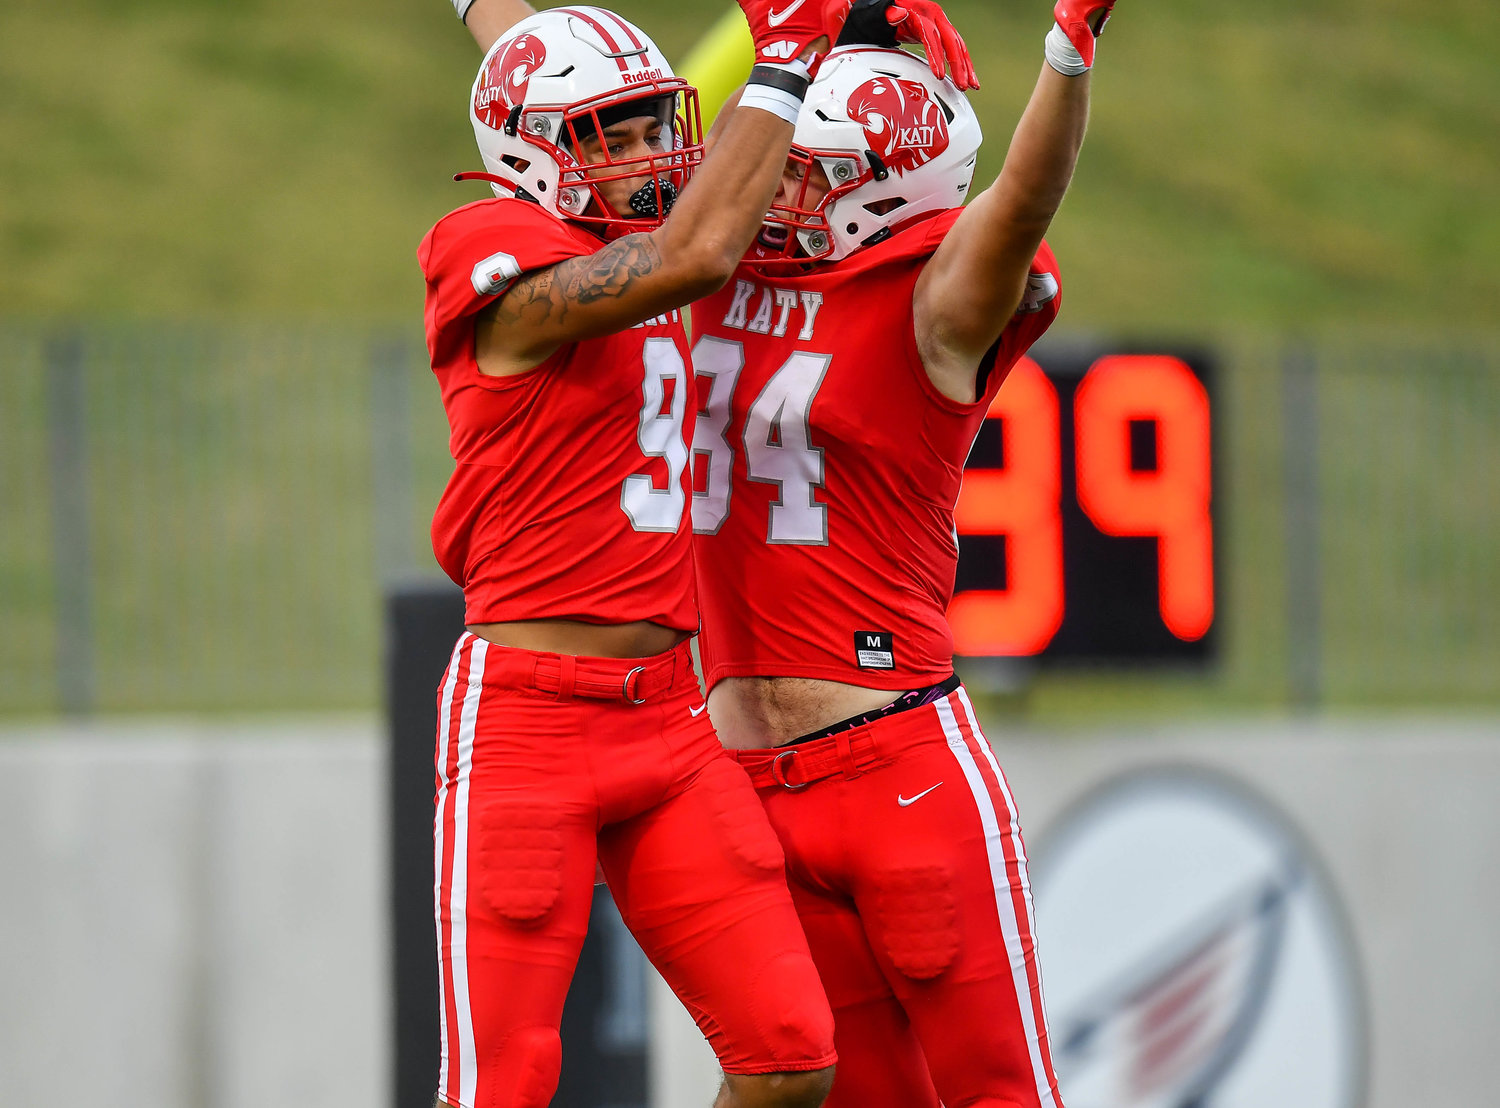 Katy, Tx. Oct. 1, 2021: Katy's #9 Antonio Silva and Katy's #84 Luke Carter celebrate a TD during a game between Katy Tigers and Tompkins Falcons at Legacy Stadium in Katy. (Photo by Mark Goodman / Katy Times)